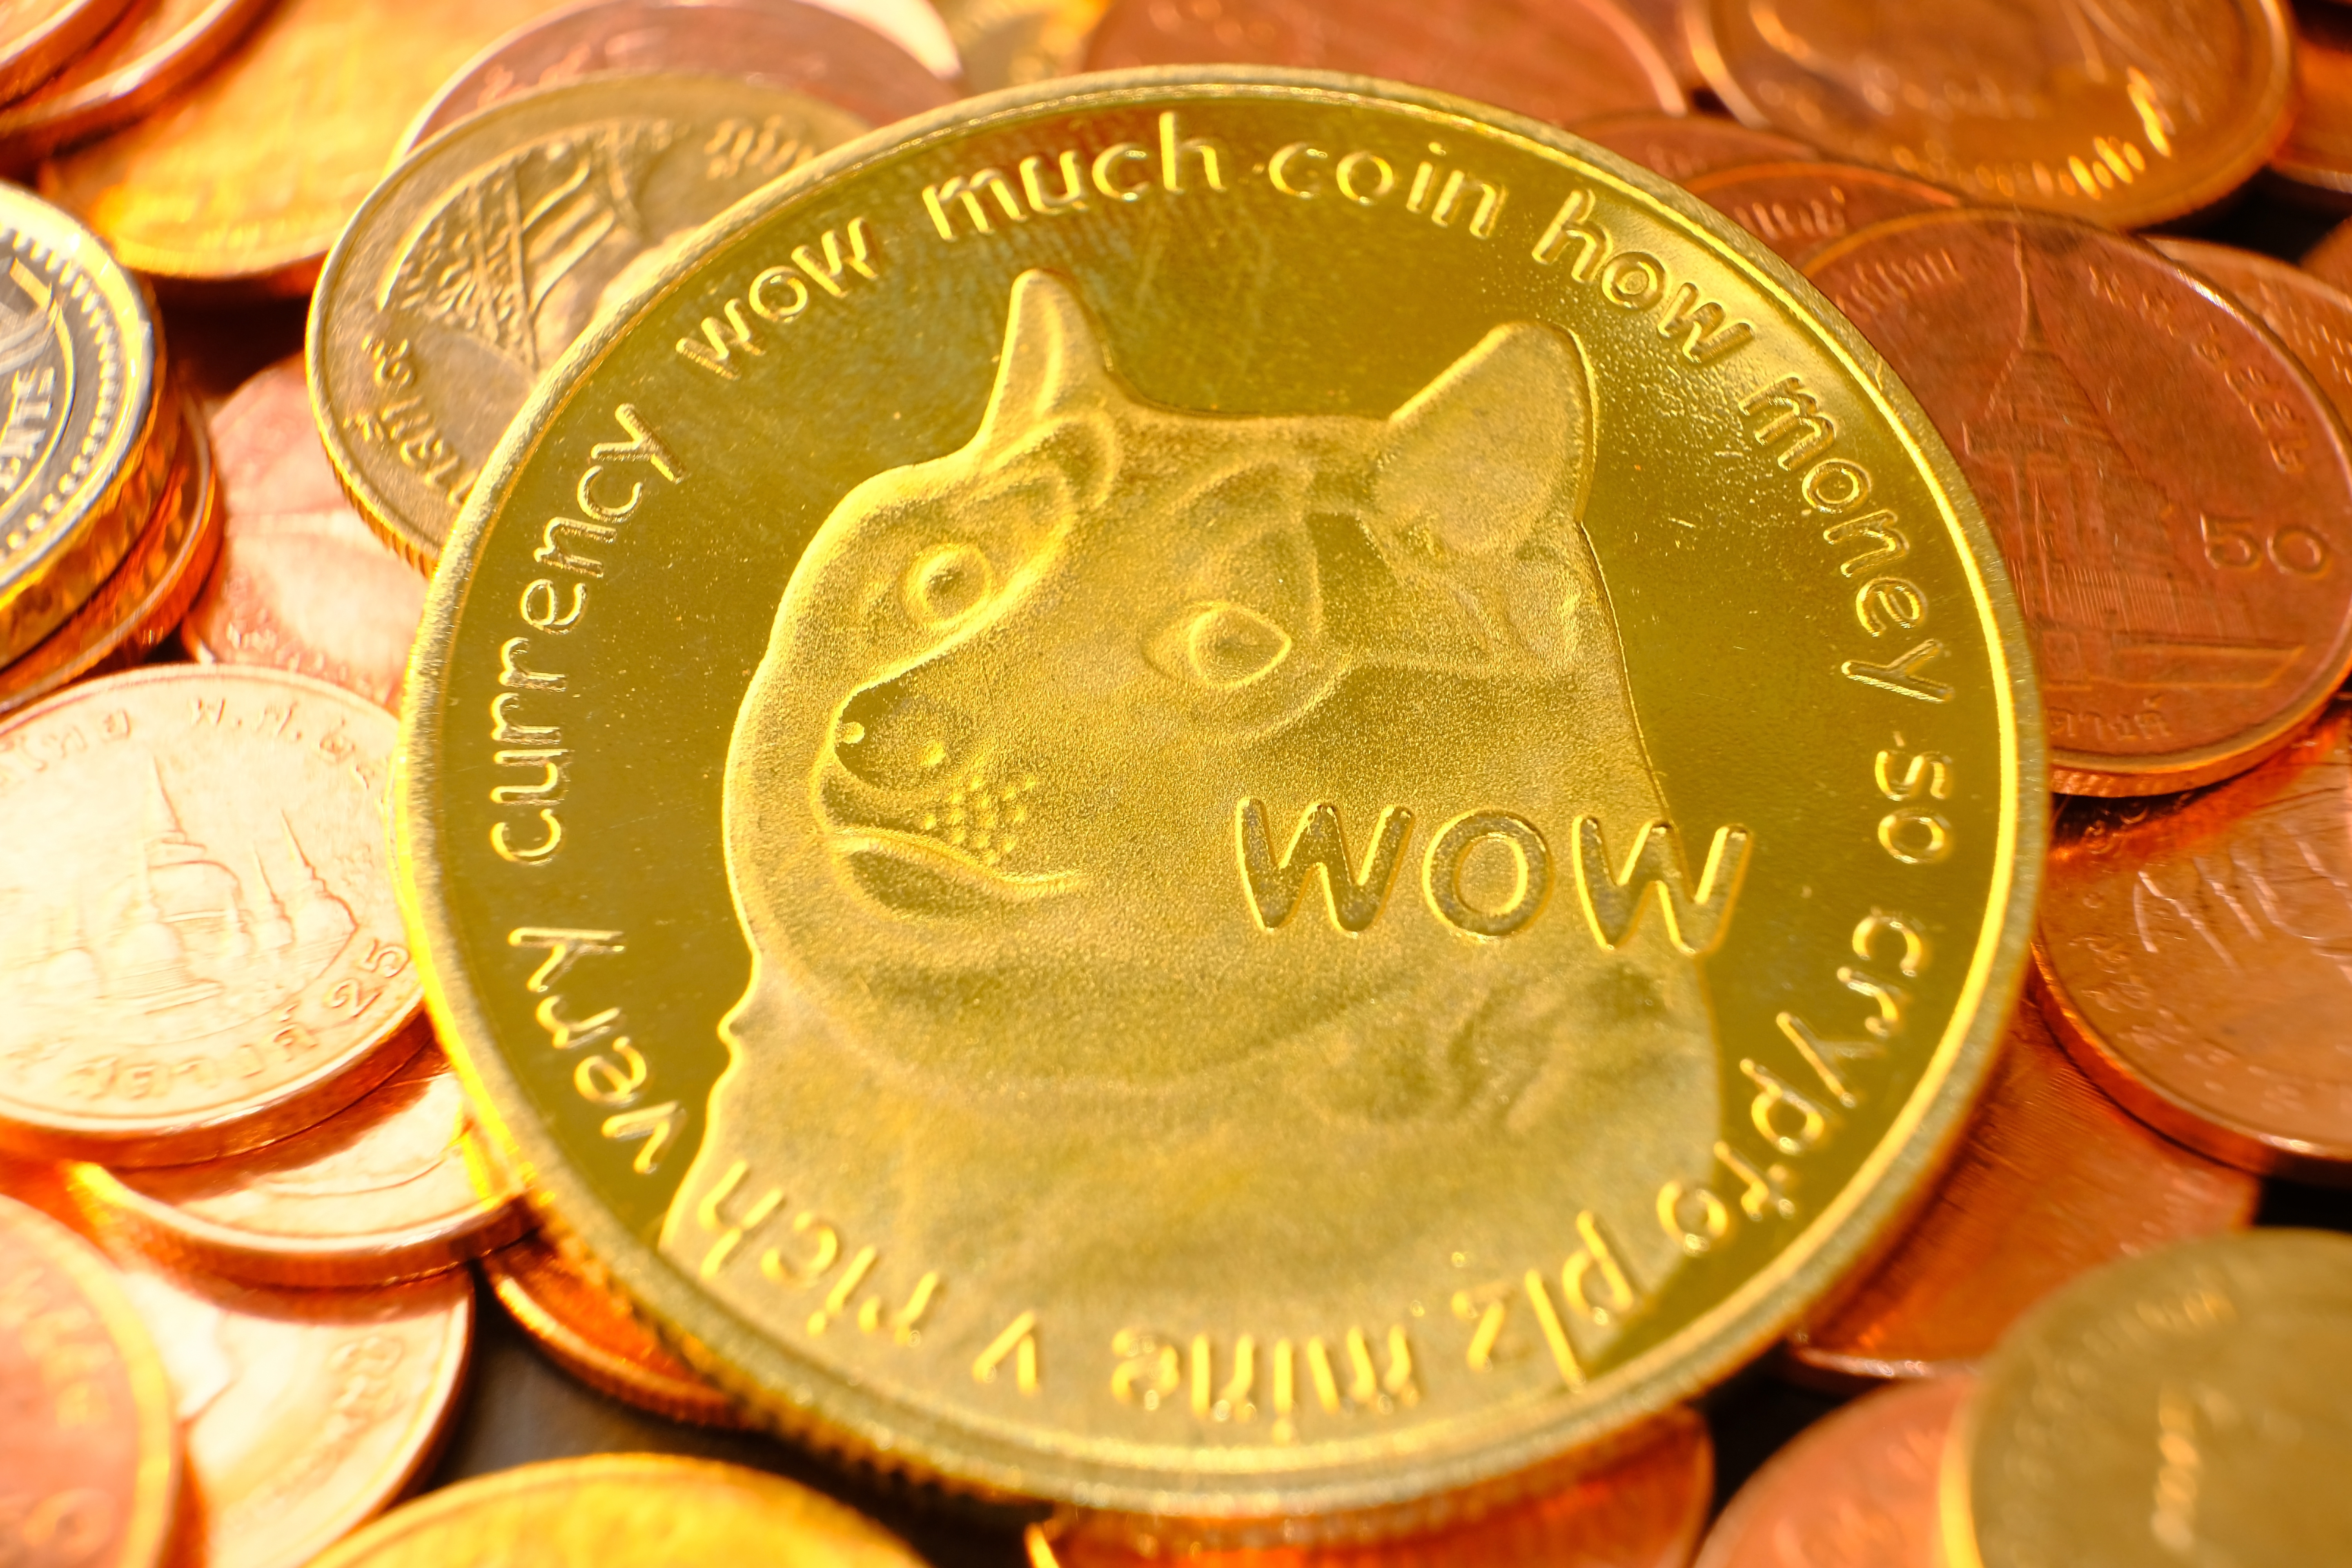 Dogecoin Price Prediction as Dormant Wallet with 2 Million DOGE Becomes Active After 9 Years – Will DOGE Dump?